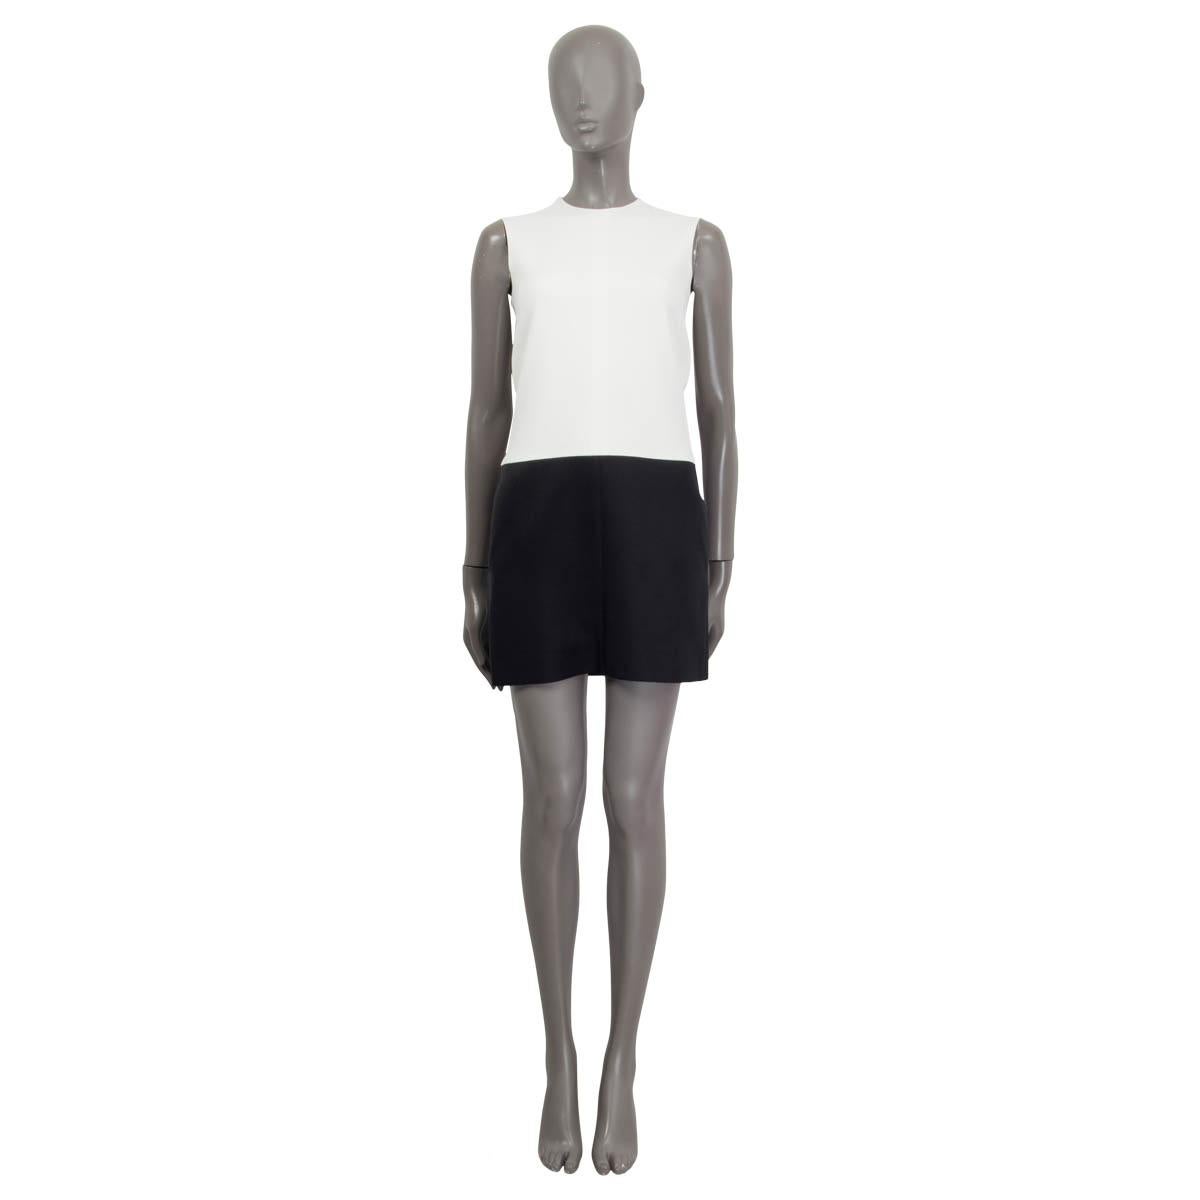 100% authentic Céline 'Depose' dress in black and white viscose (50%), acetate (47%) and elastane (3%). Features two slit pockets on the side. Opens with a concealed zipper and a hook on the back. Lined in white silk (100%). Has been worn and is in